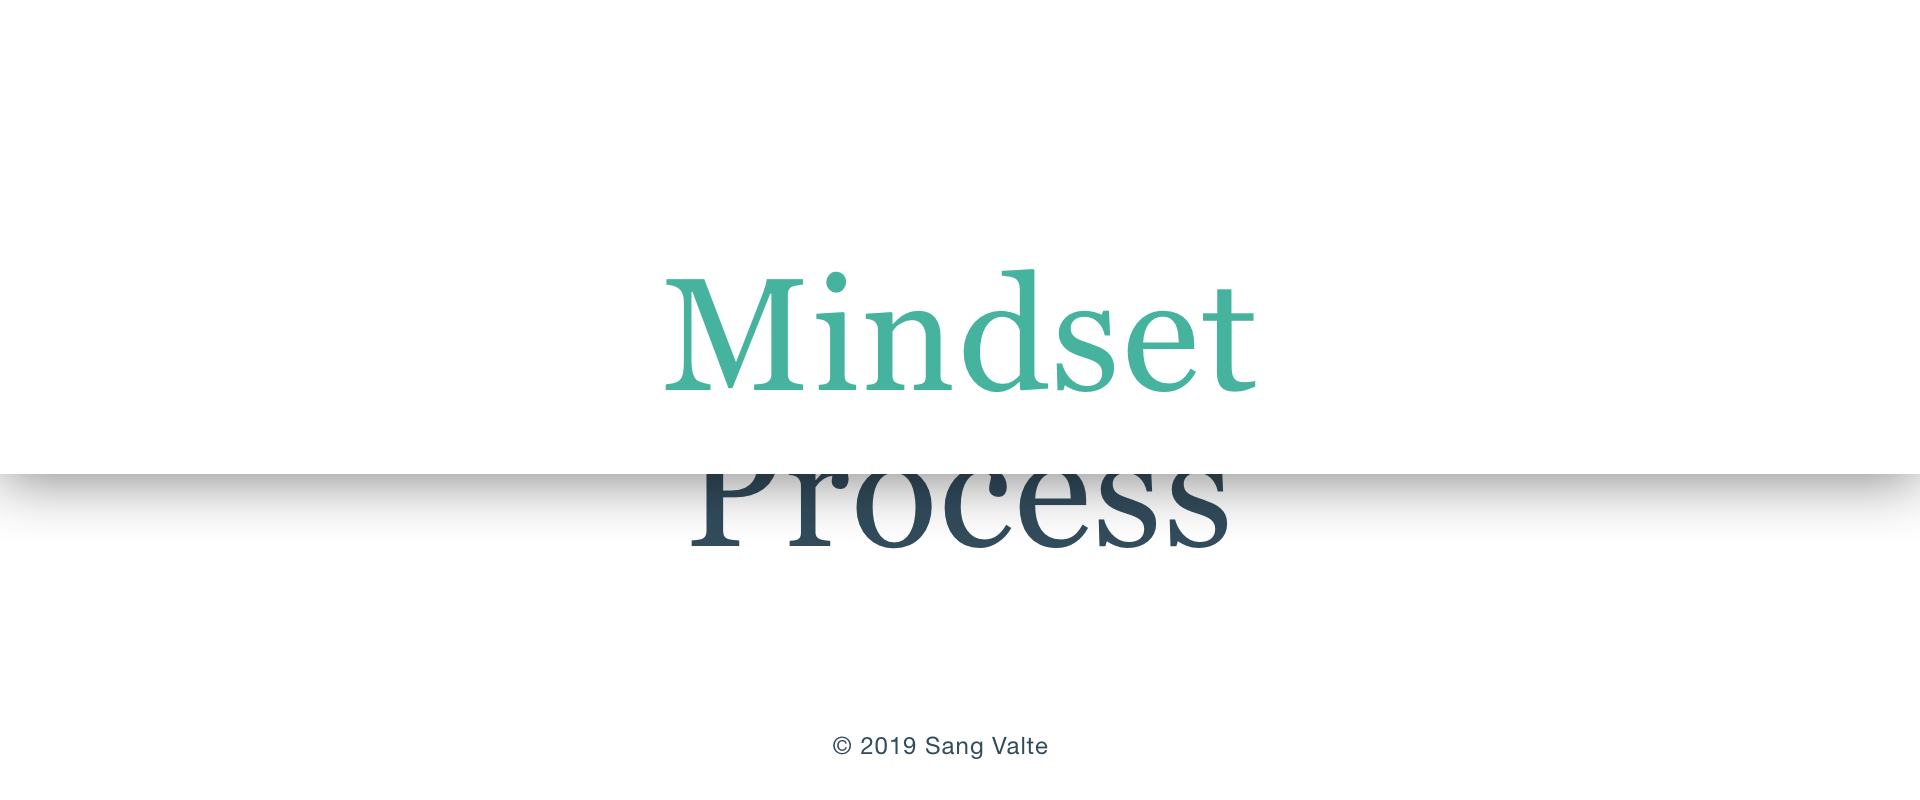 Mindset over Process: How to drive Project Success